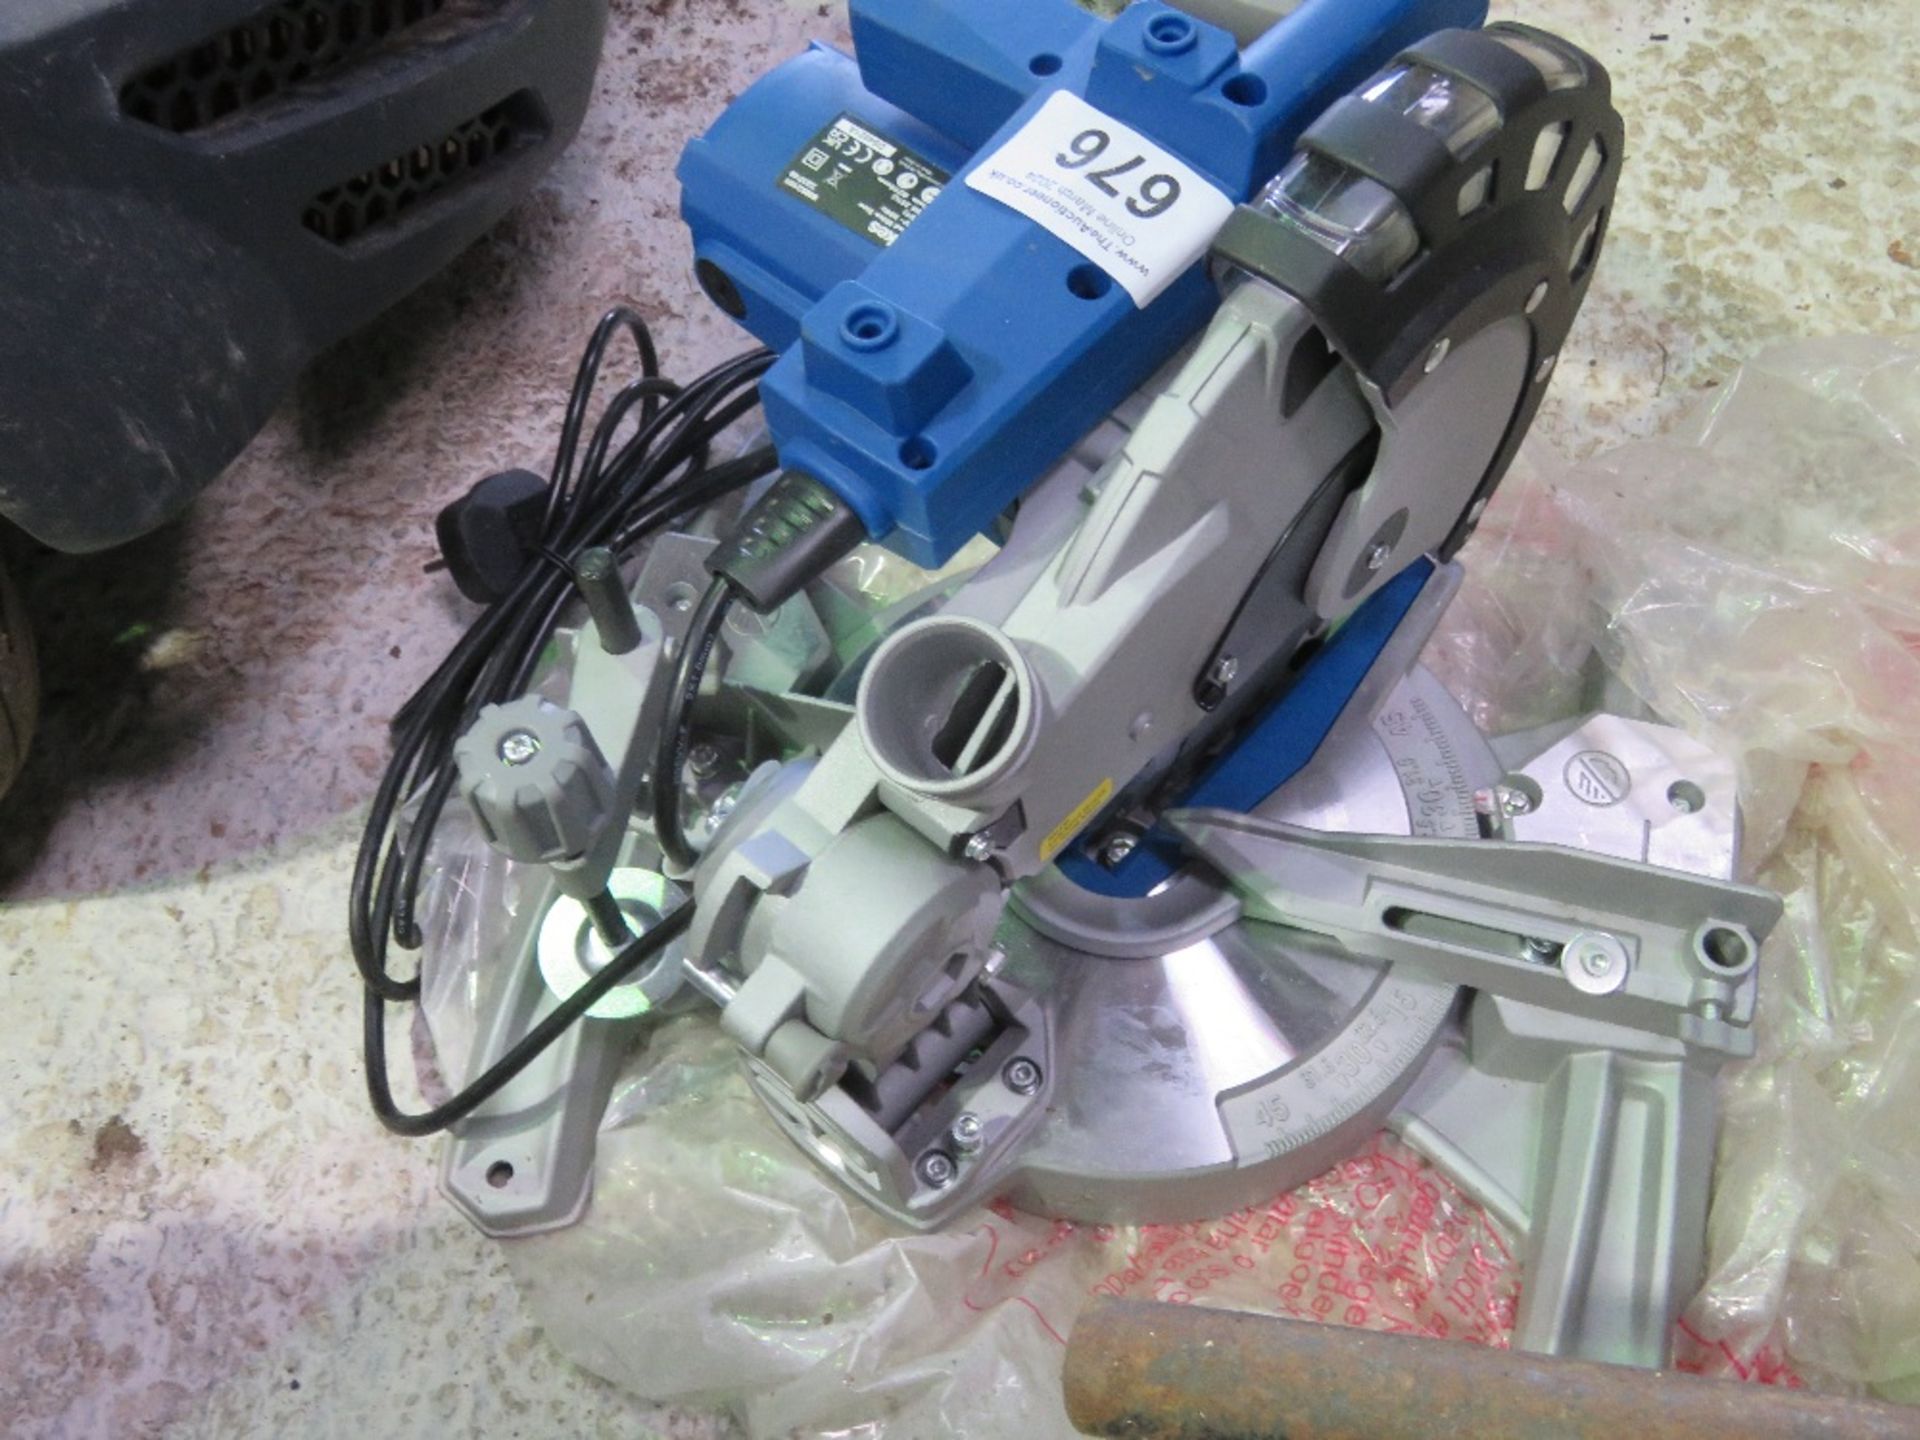 WICKES 240VOLT MITRE SAW, APPEARS LITTLE/UNUSED. THIS LOT IS SOLD UNDER THE AUCTIONEERS MARGIN SC - Image 3 of 4